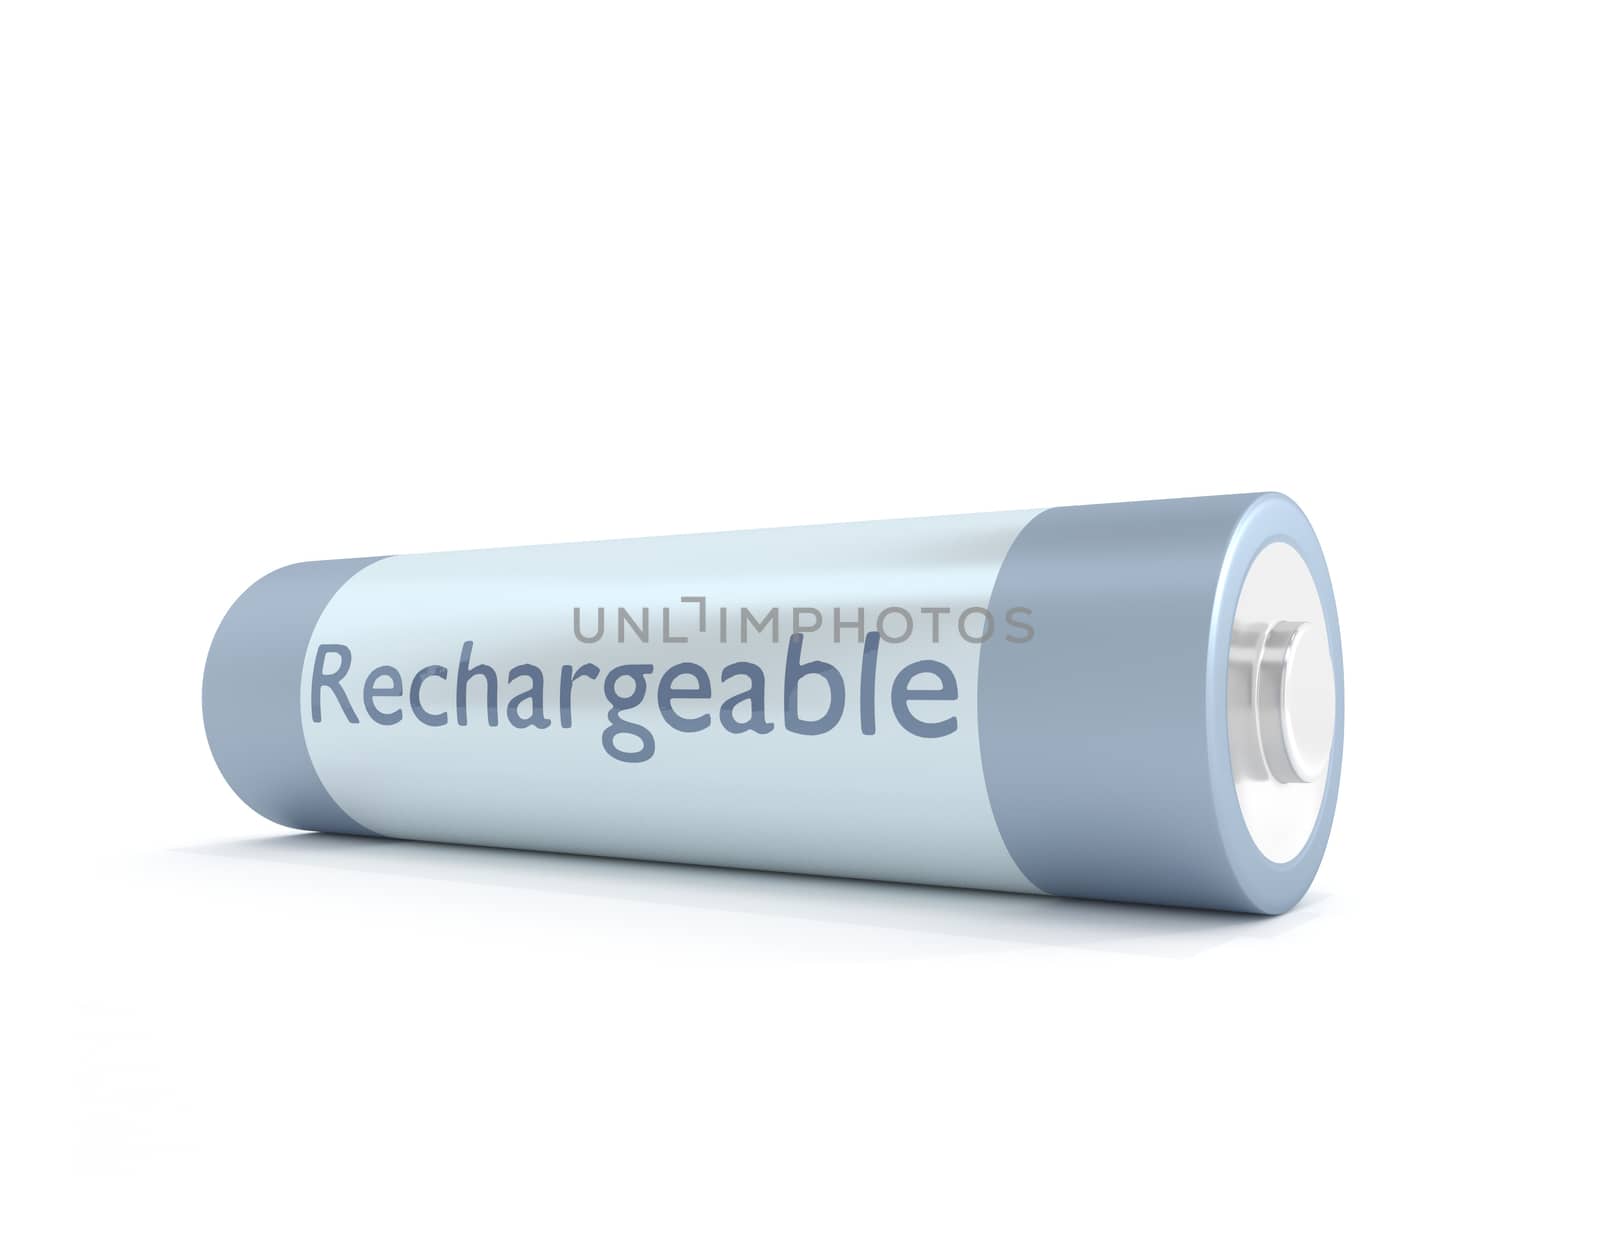 Rechargeable battery. by 72soul